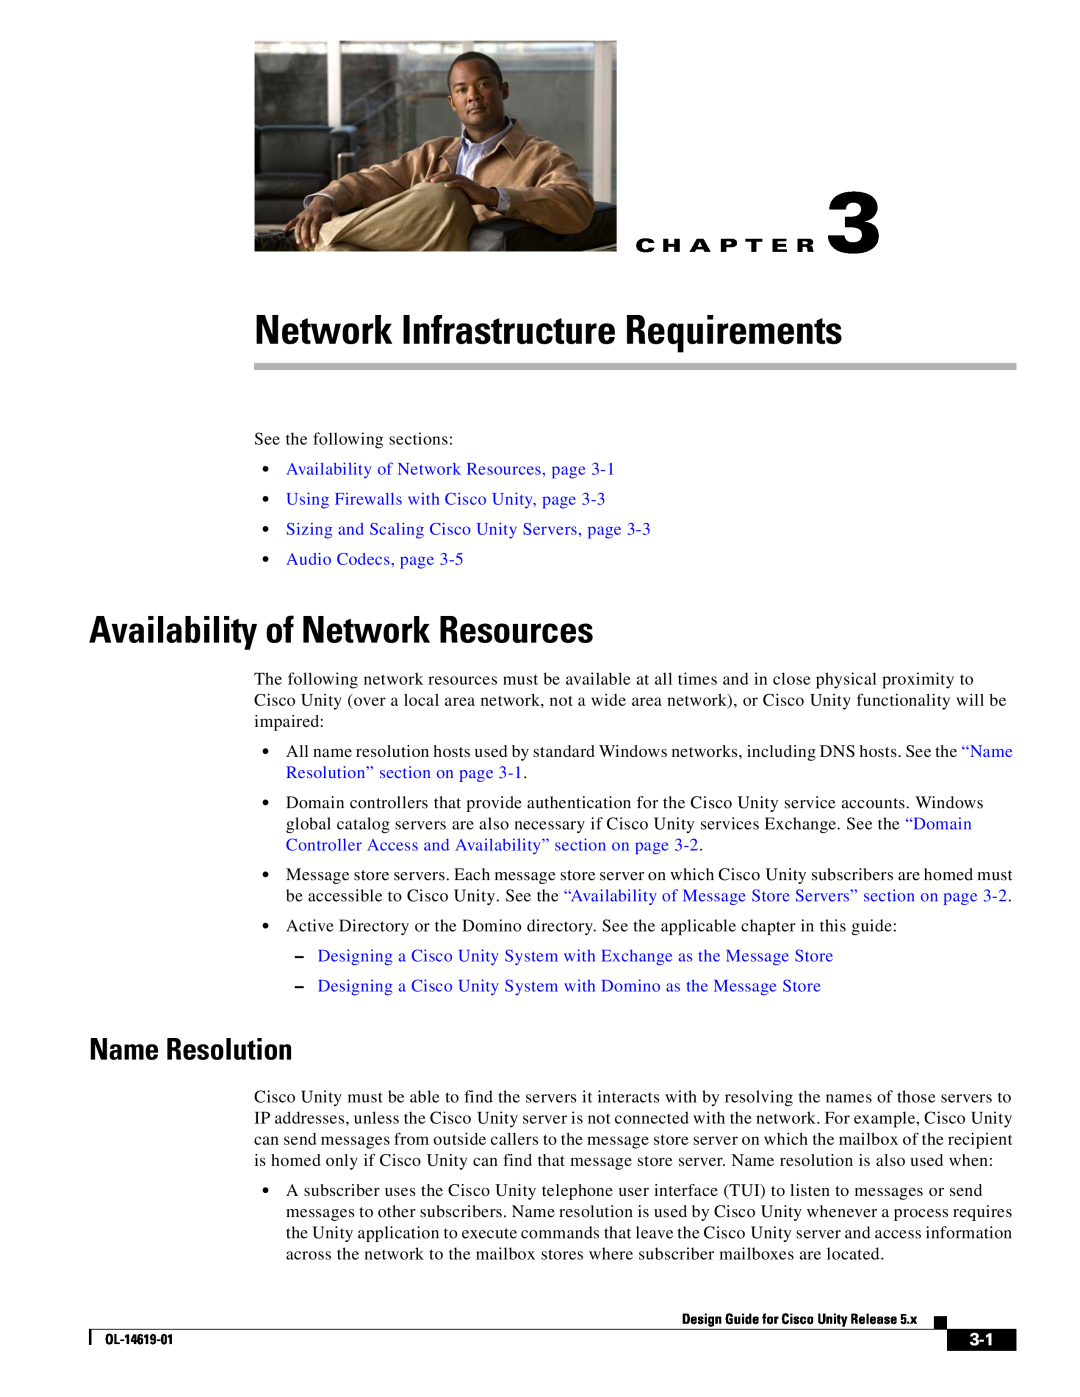 Cisco Systems OL-14619-01 manual Network Infrastructure Requirements, Availability of Network Resources, Name Resolution 